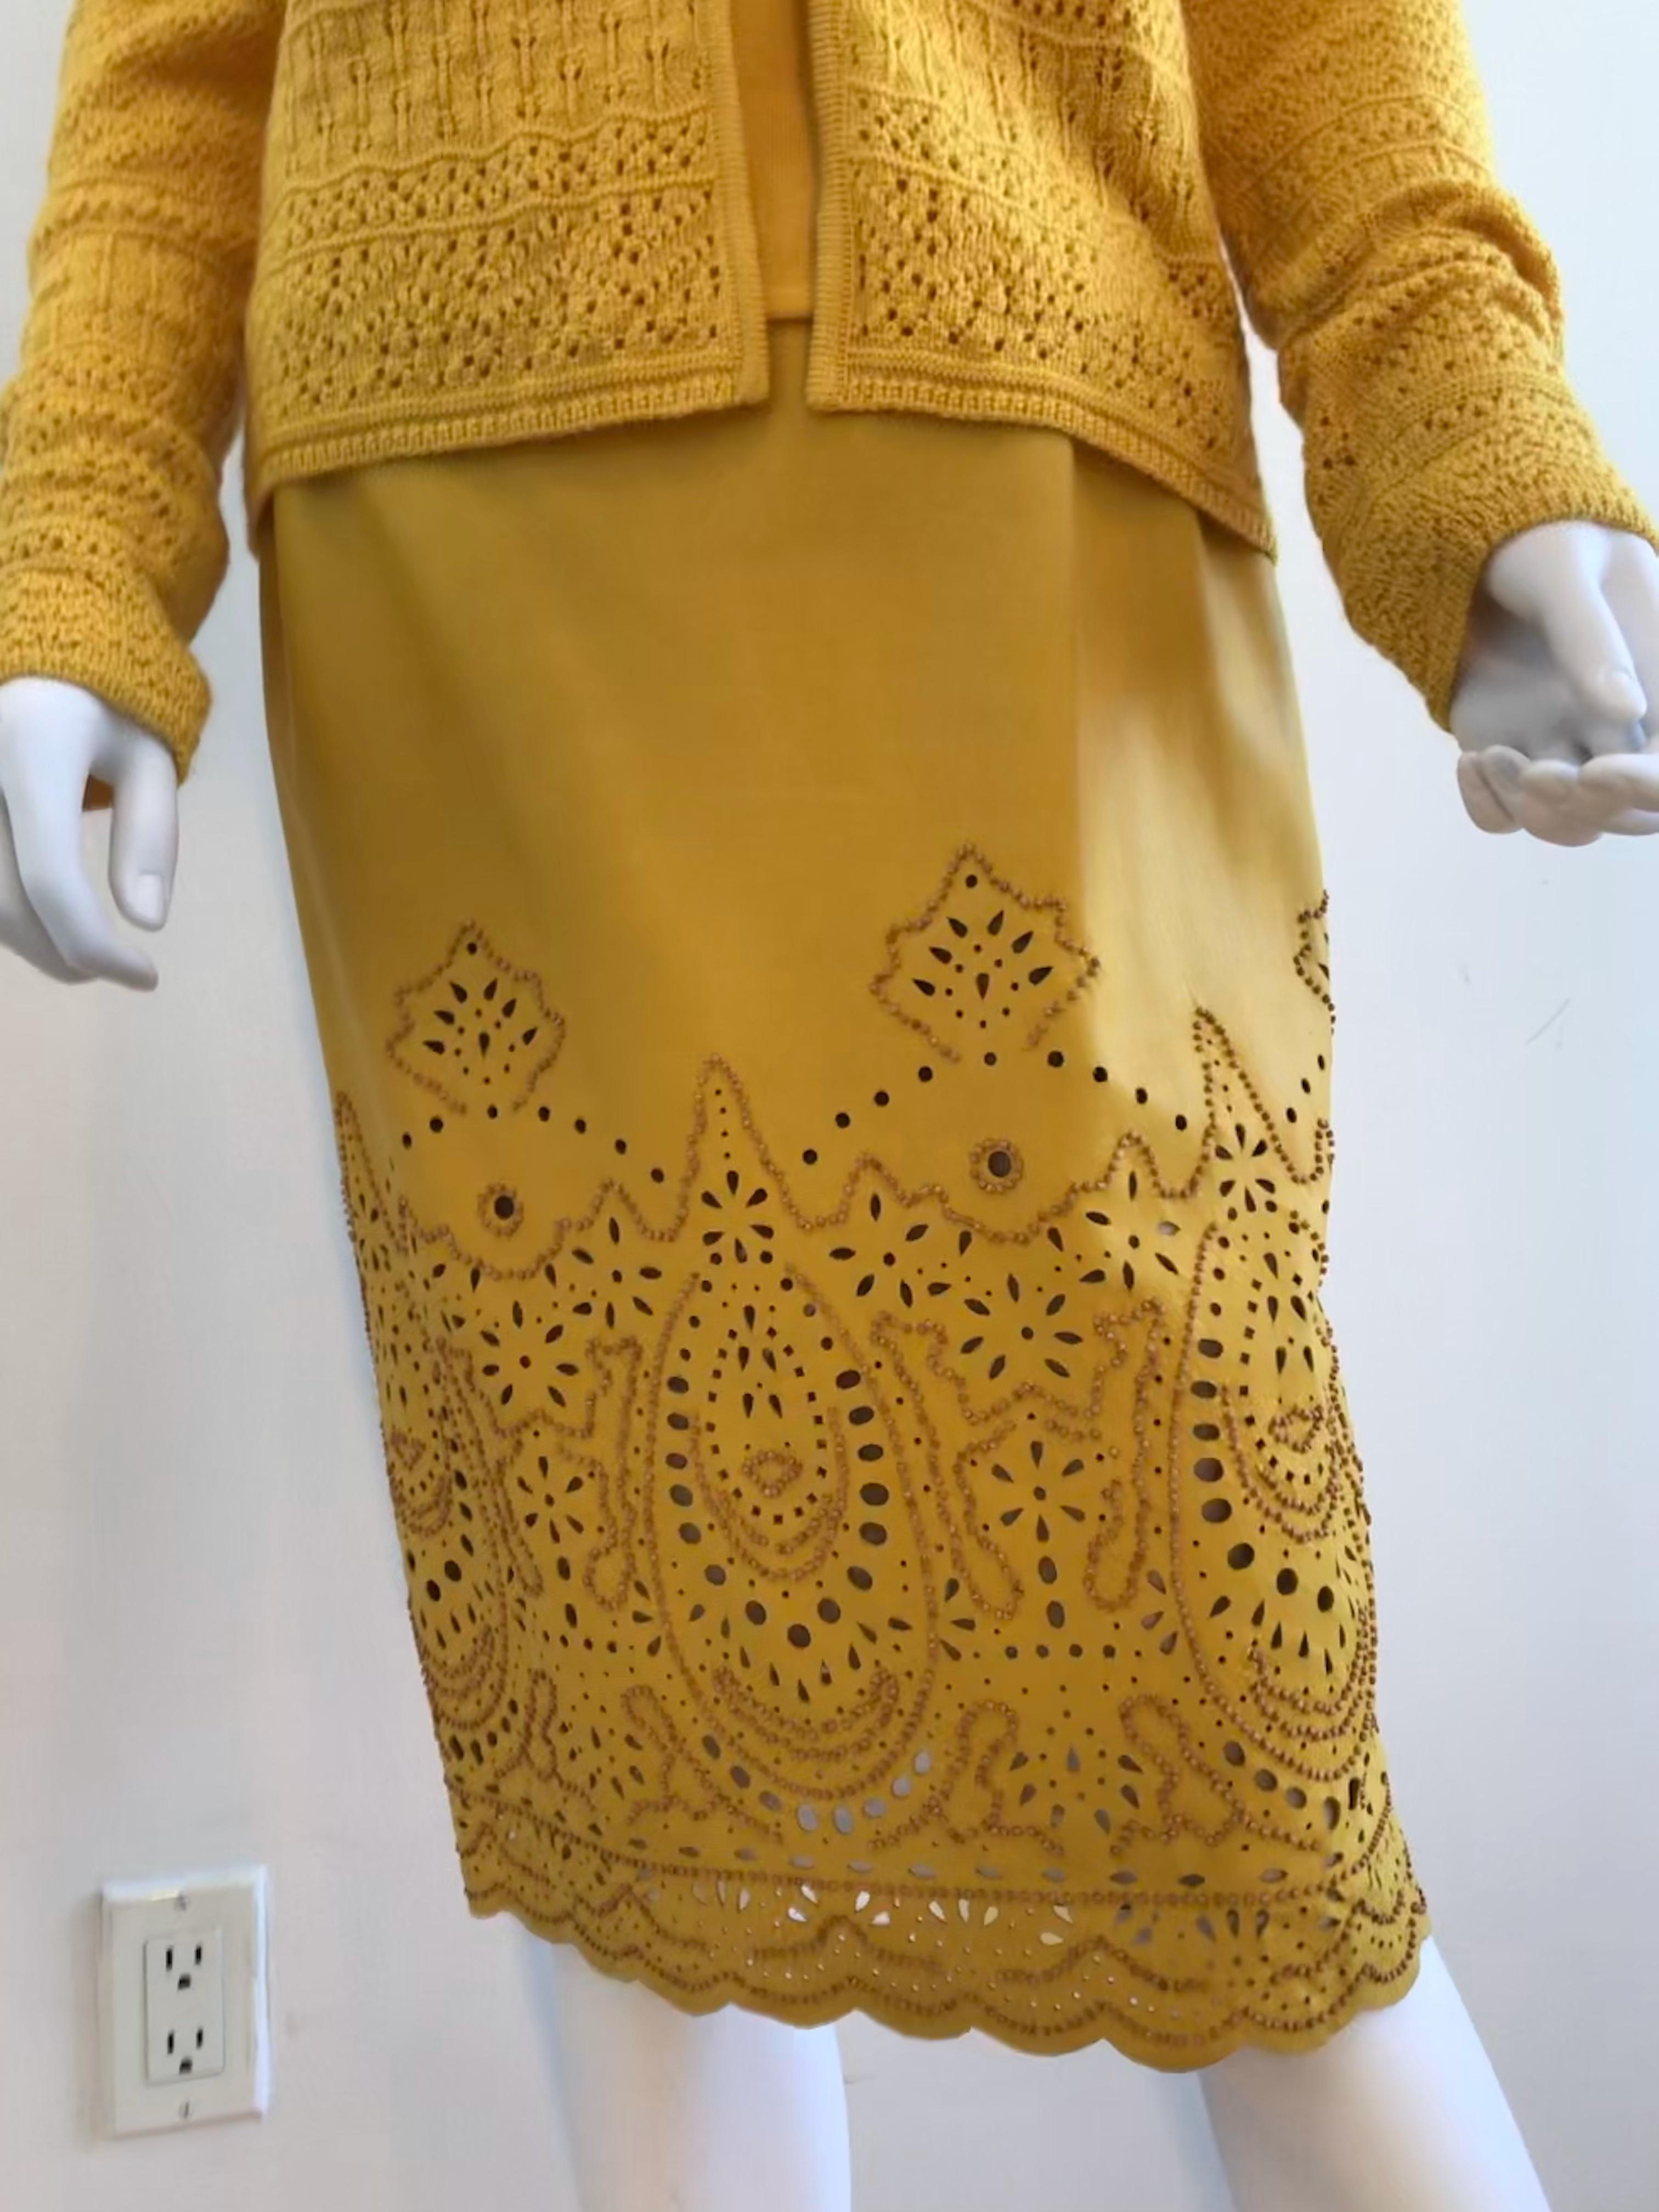 Oscar De La Renta for Saks Fifth Avenue Canary Yellow Cardigan & Tank Top Set In Good Condition For Sale In Brooklyn, NY